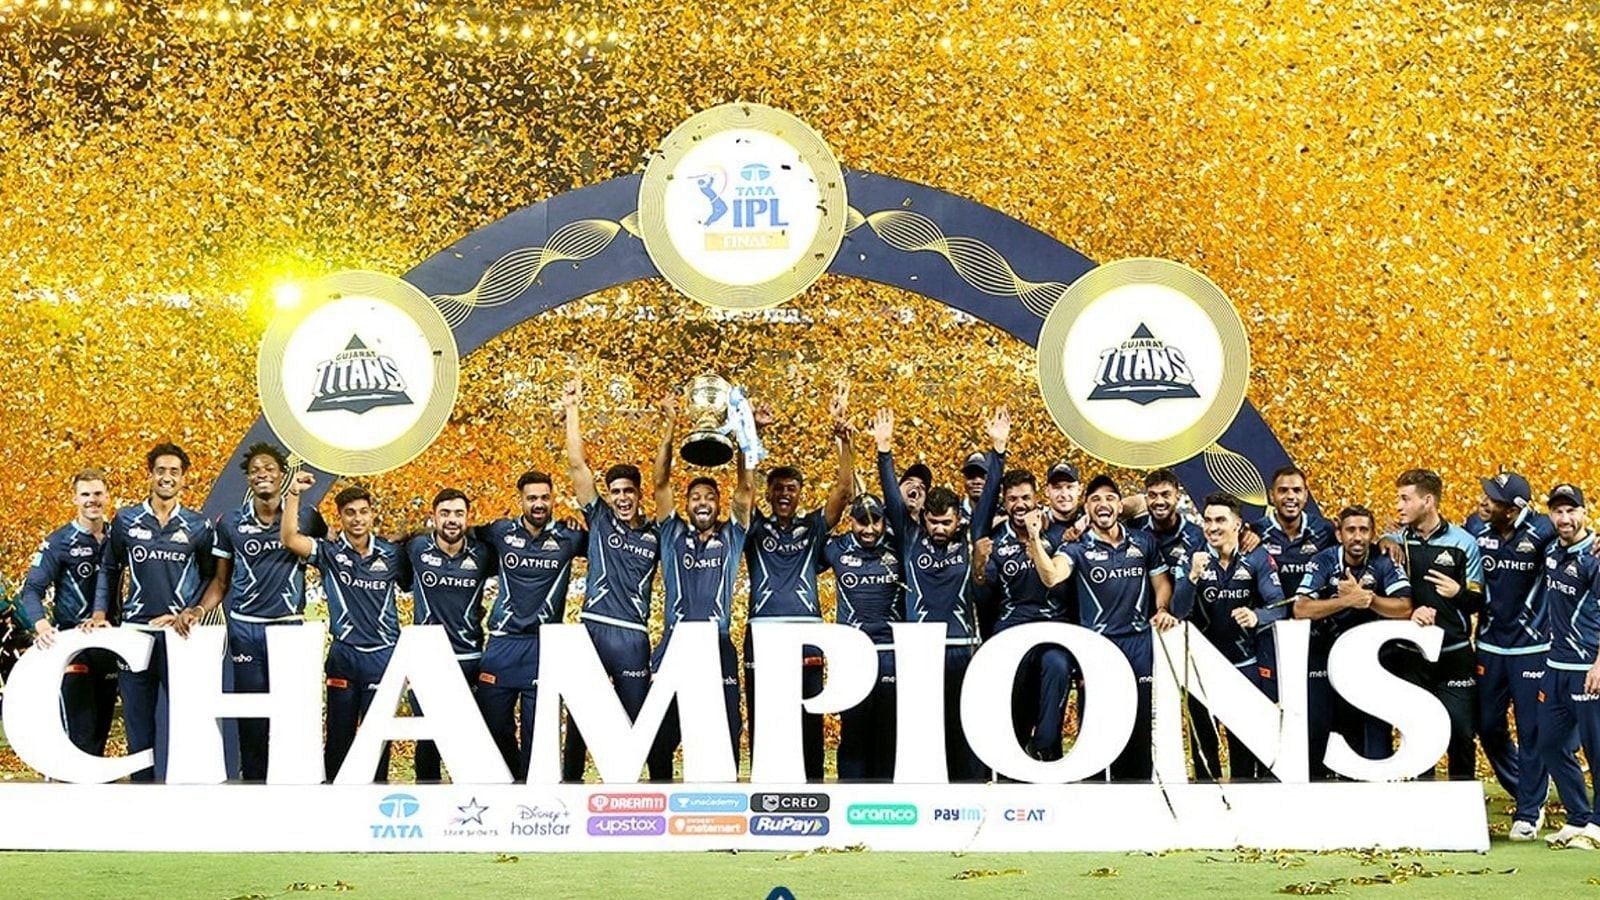 Gujarat Titans were crowned the champions of the fifteenth edition of the IPL.